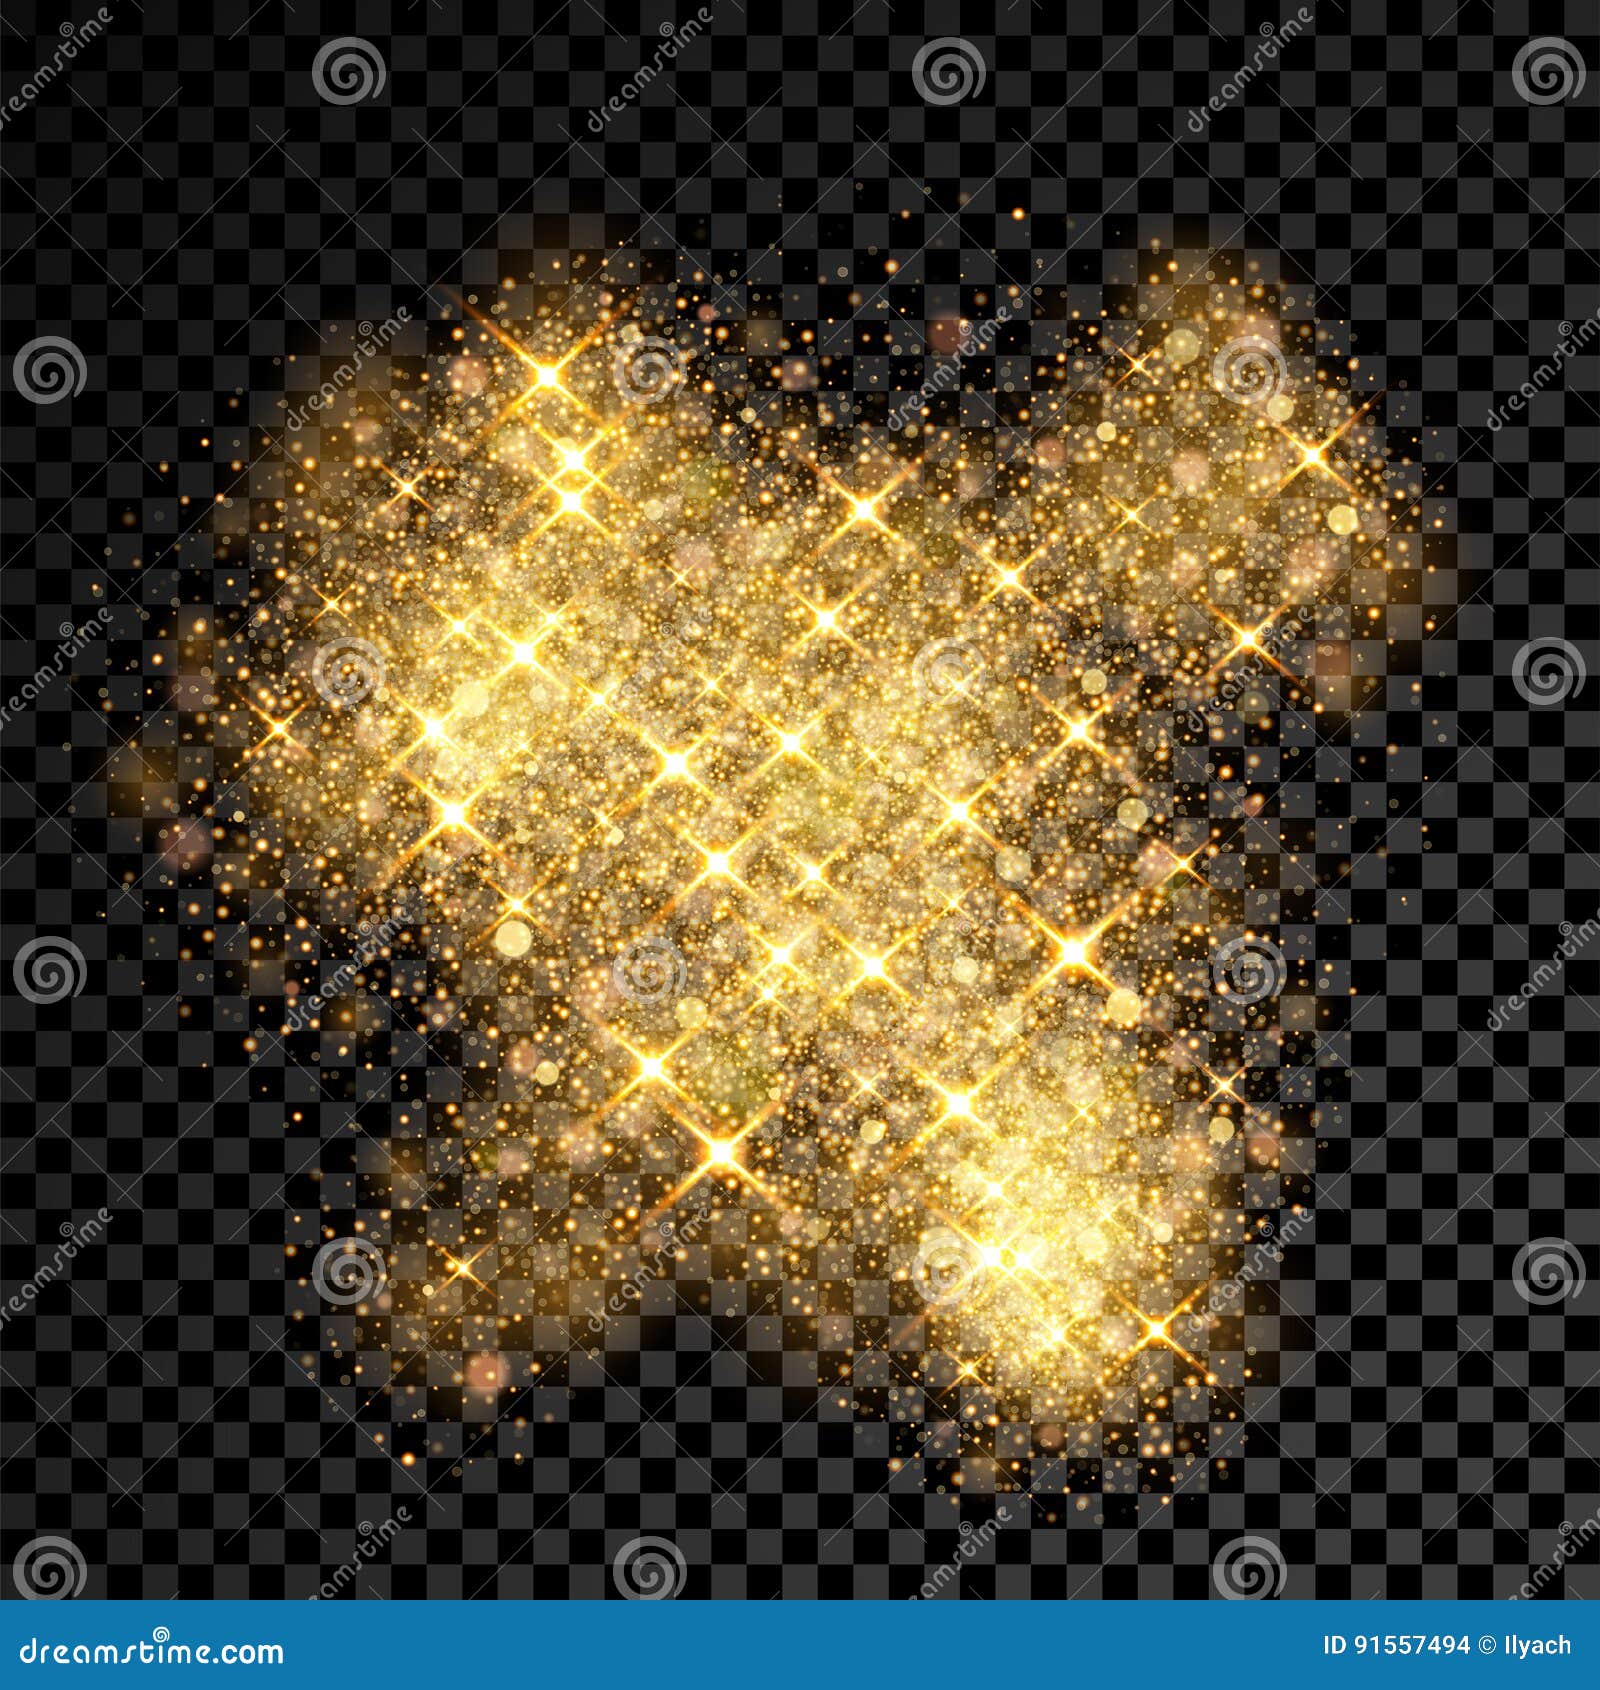 Gold Glitter Spray Effect of Sparkling Particles on Vector Transparent  Background Stock Vector - Illustration of glitter, black: 91557494